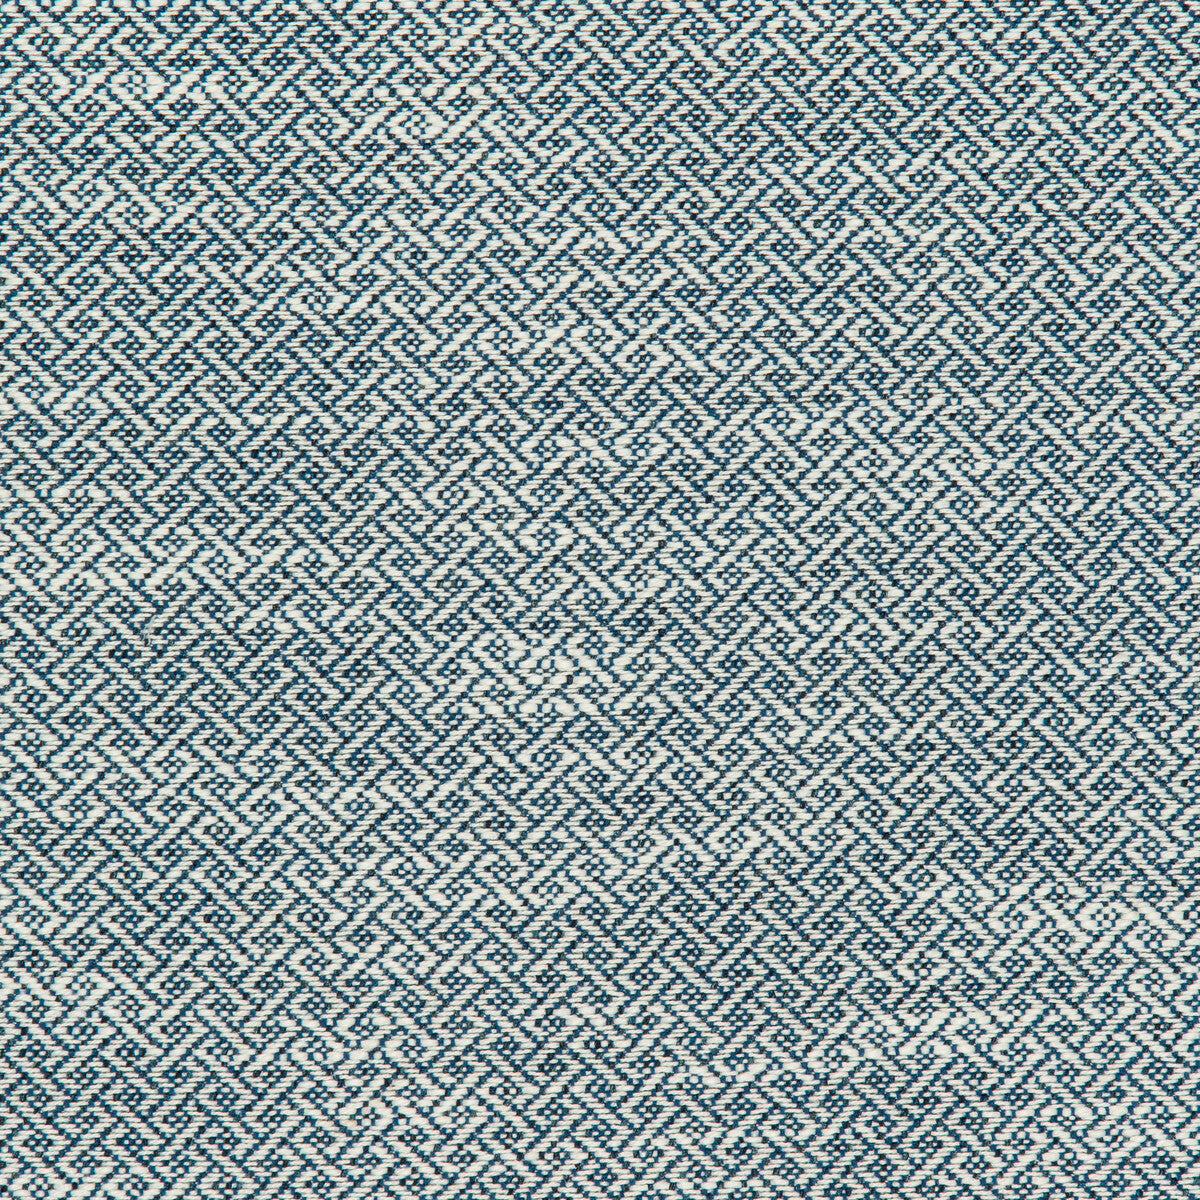 Kravet Design fabric in 36086-51 color - pattern 36086.51.0 - by Kravet Design in the Inside Out Performance Fabrics collection